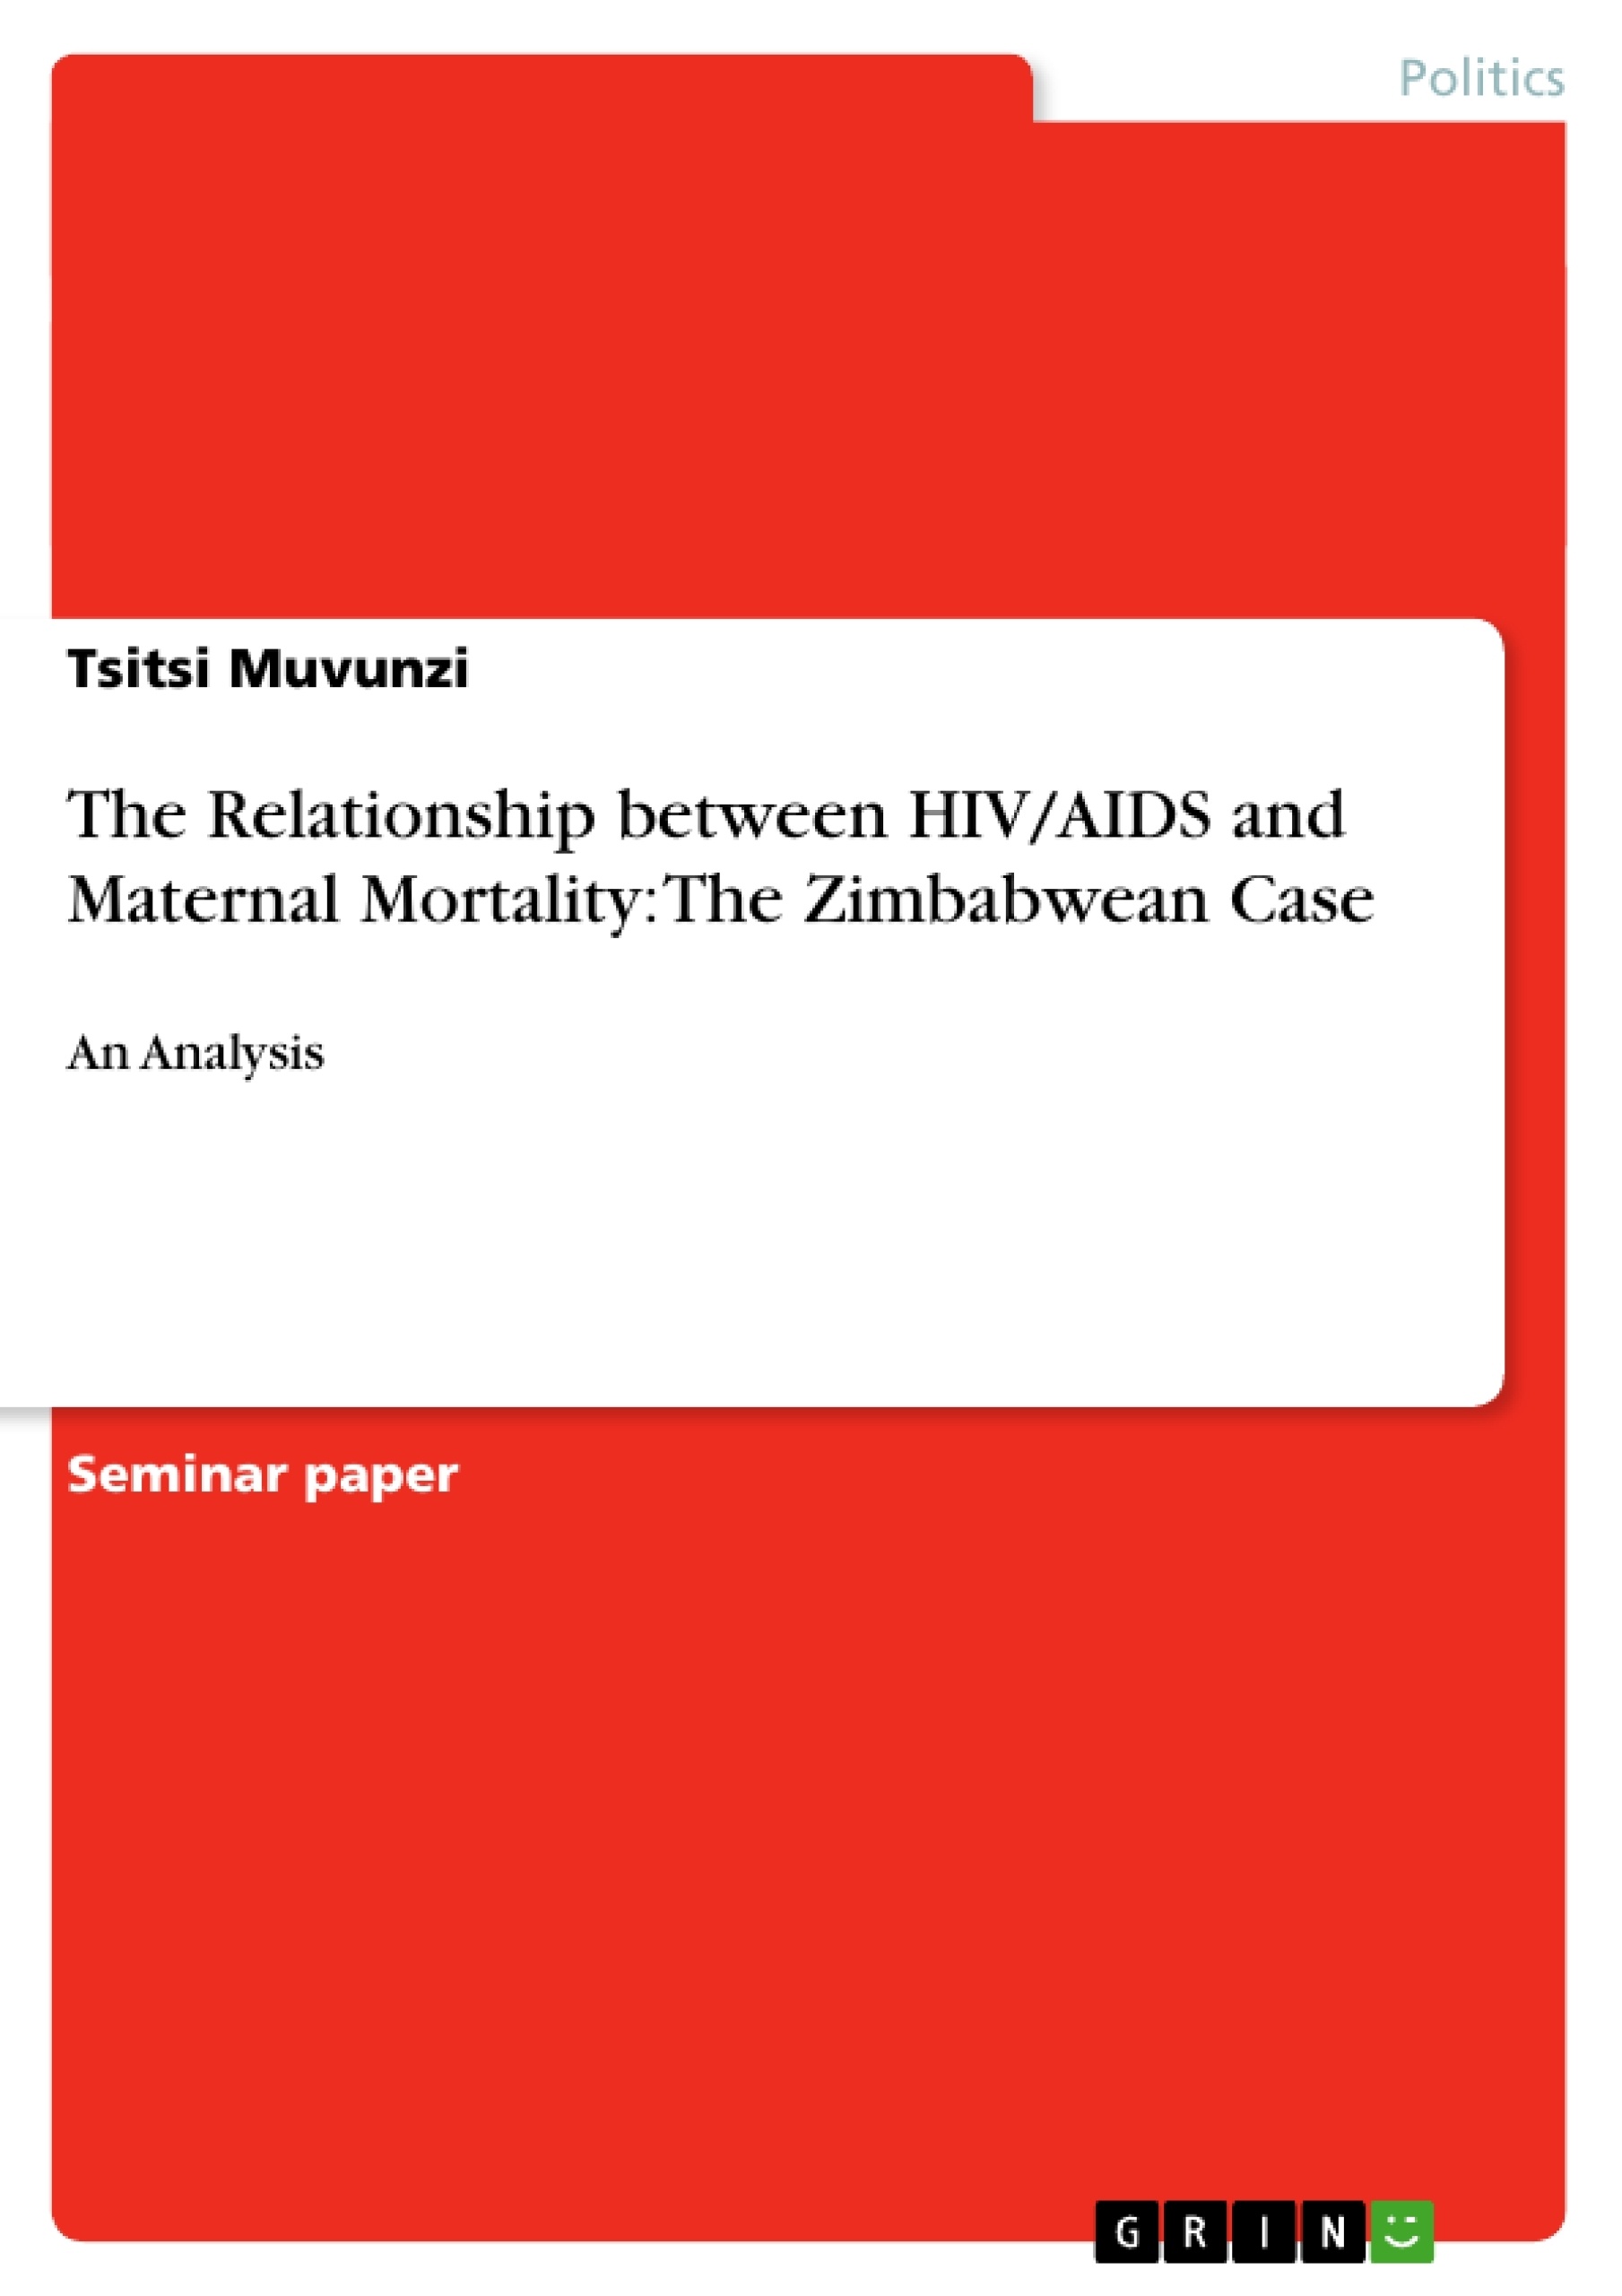 Titre: The Relationship between HIV/AIDS and Maternal Mortality: The Zimbabwean Case